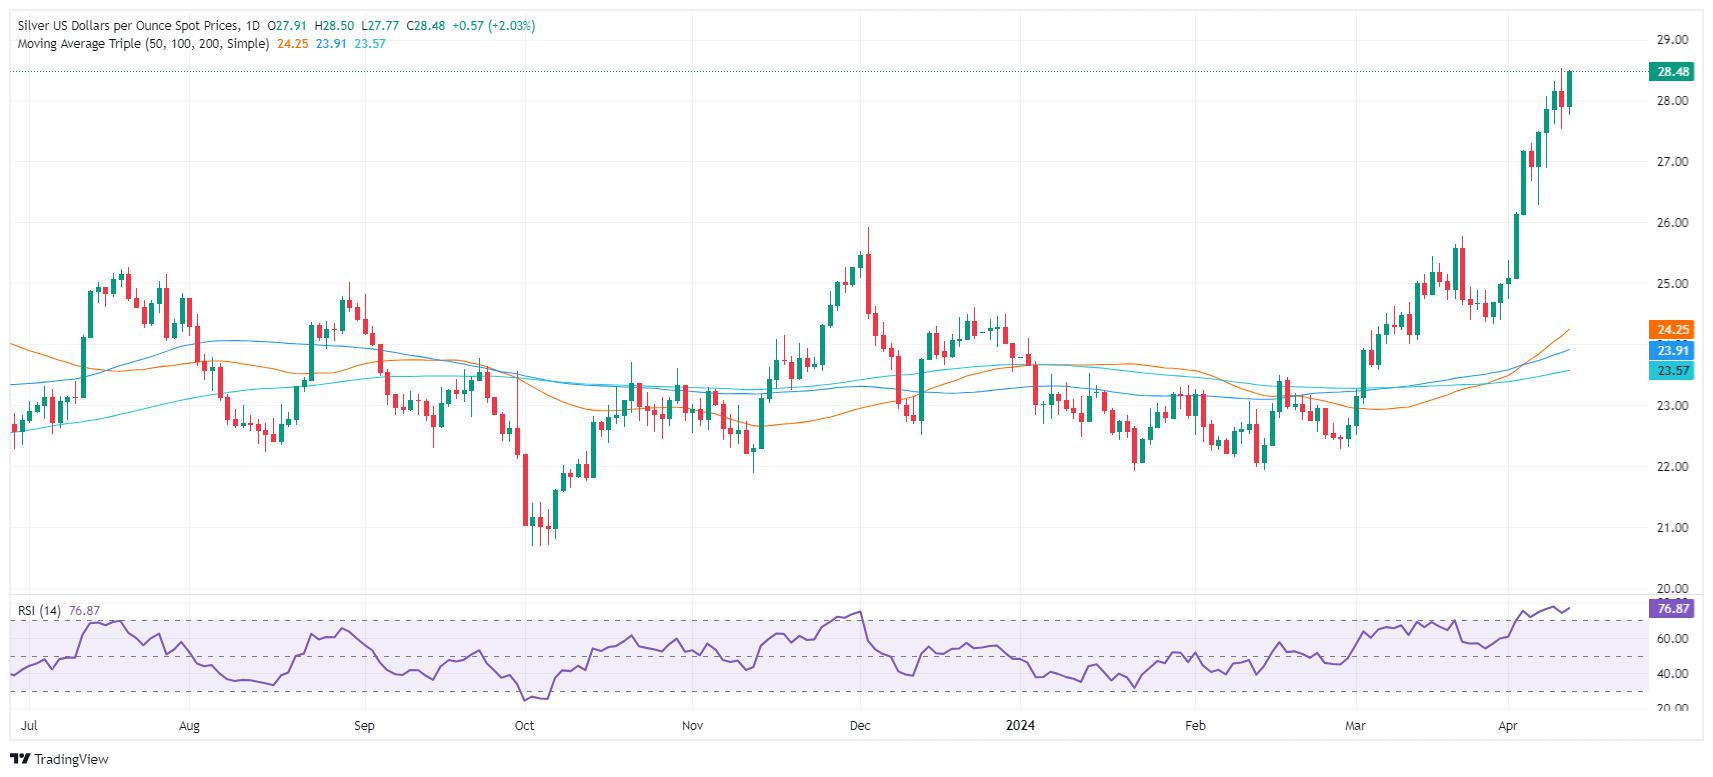 Silver Price Analysis: XAG/USD rallies above $28.00 as bullish trend is intact